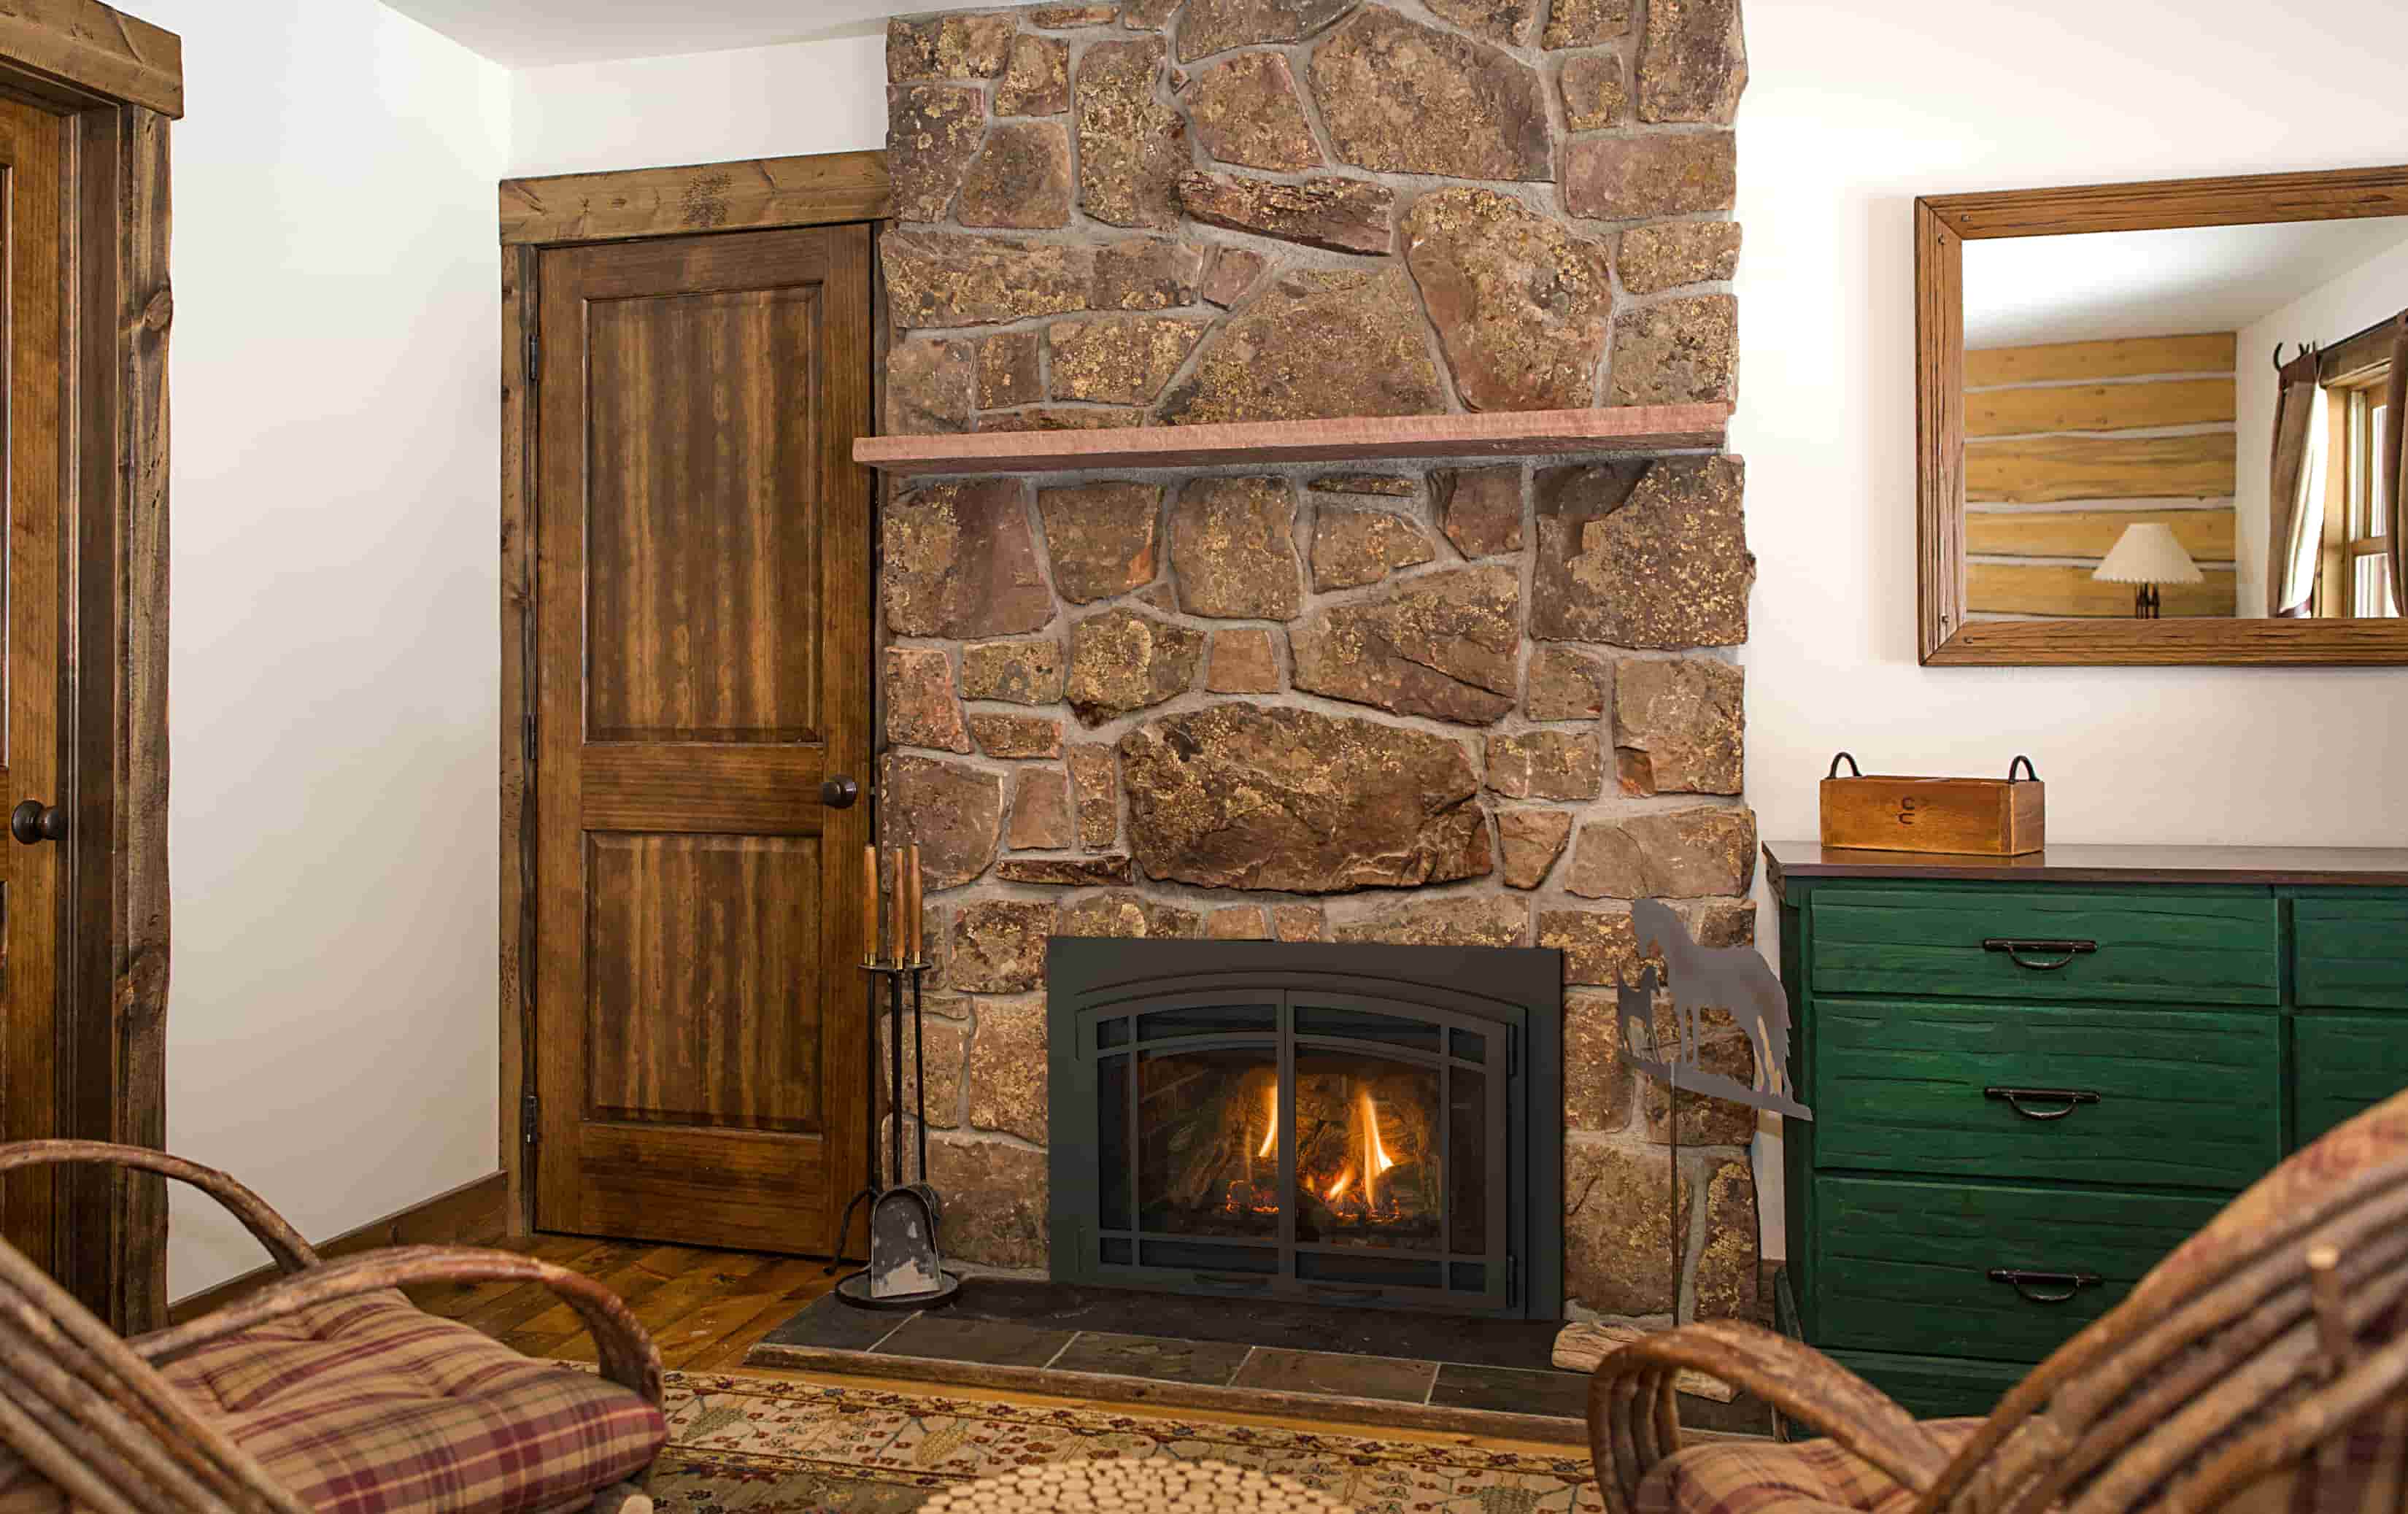 Add a Propane Fireplace in Home